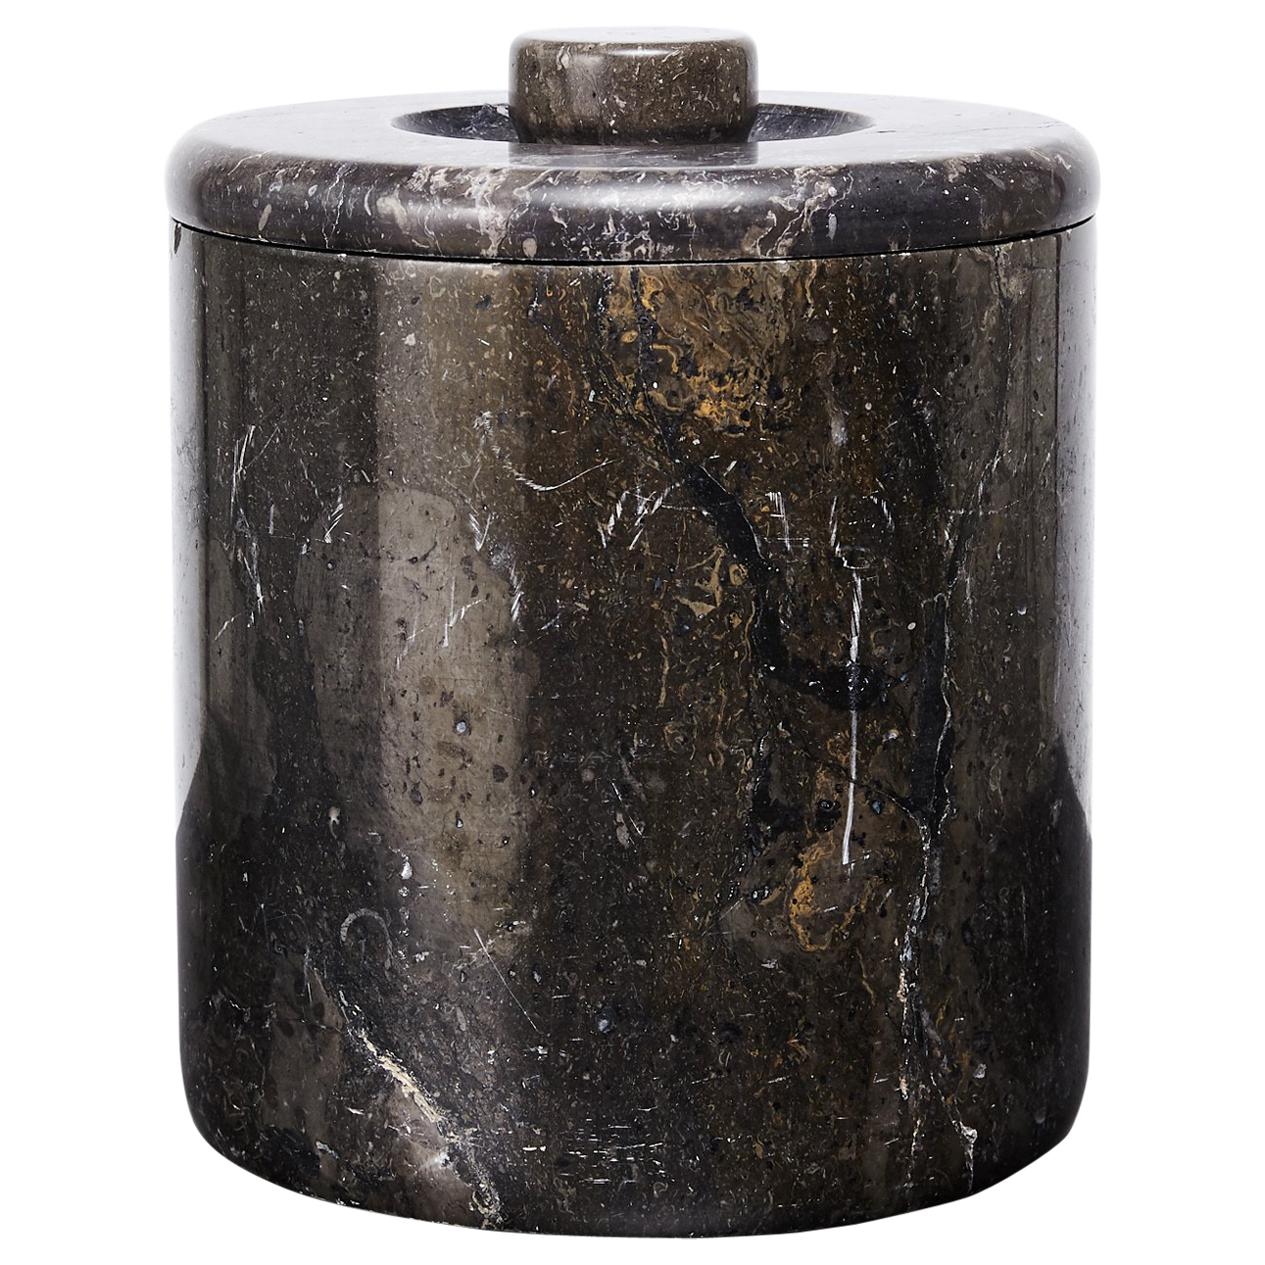 Marble Ice Bucket from the Viceroy Miami Designed by Kelly Wearstler